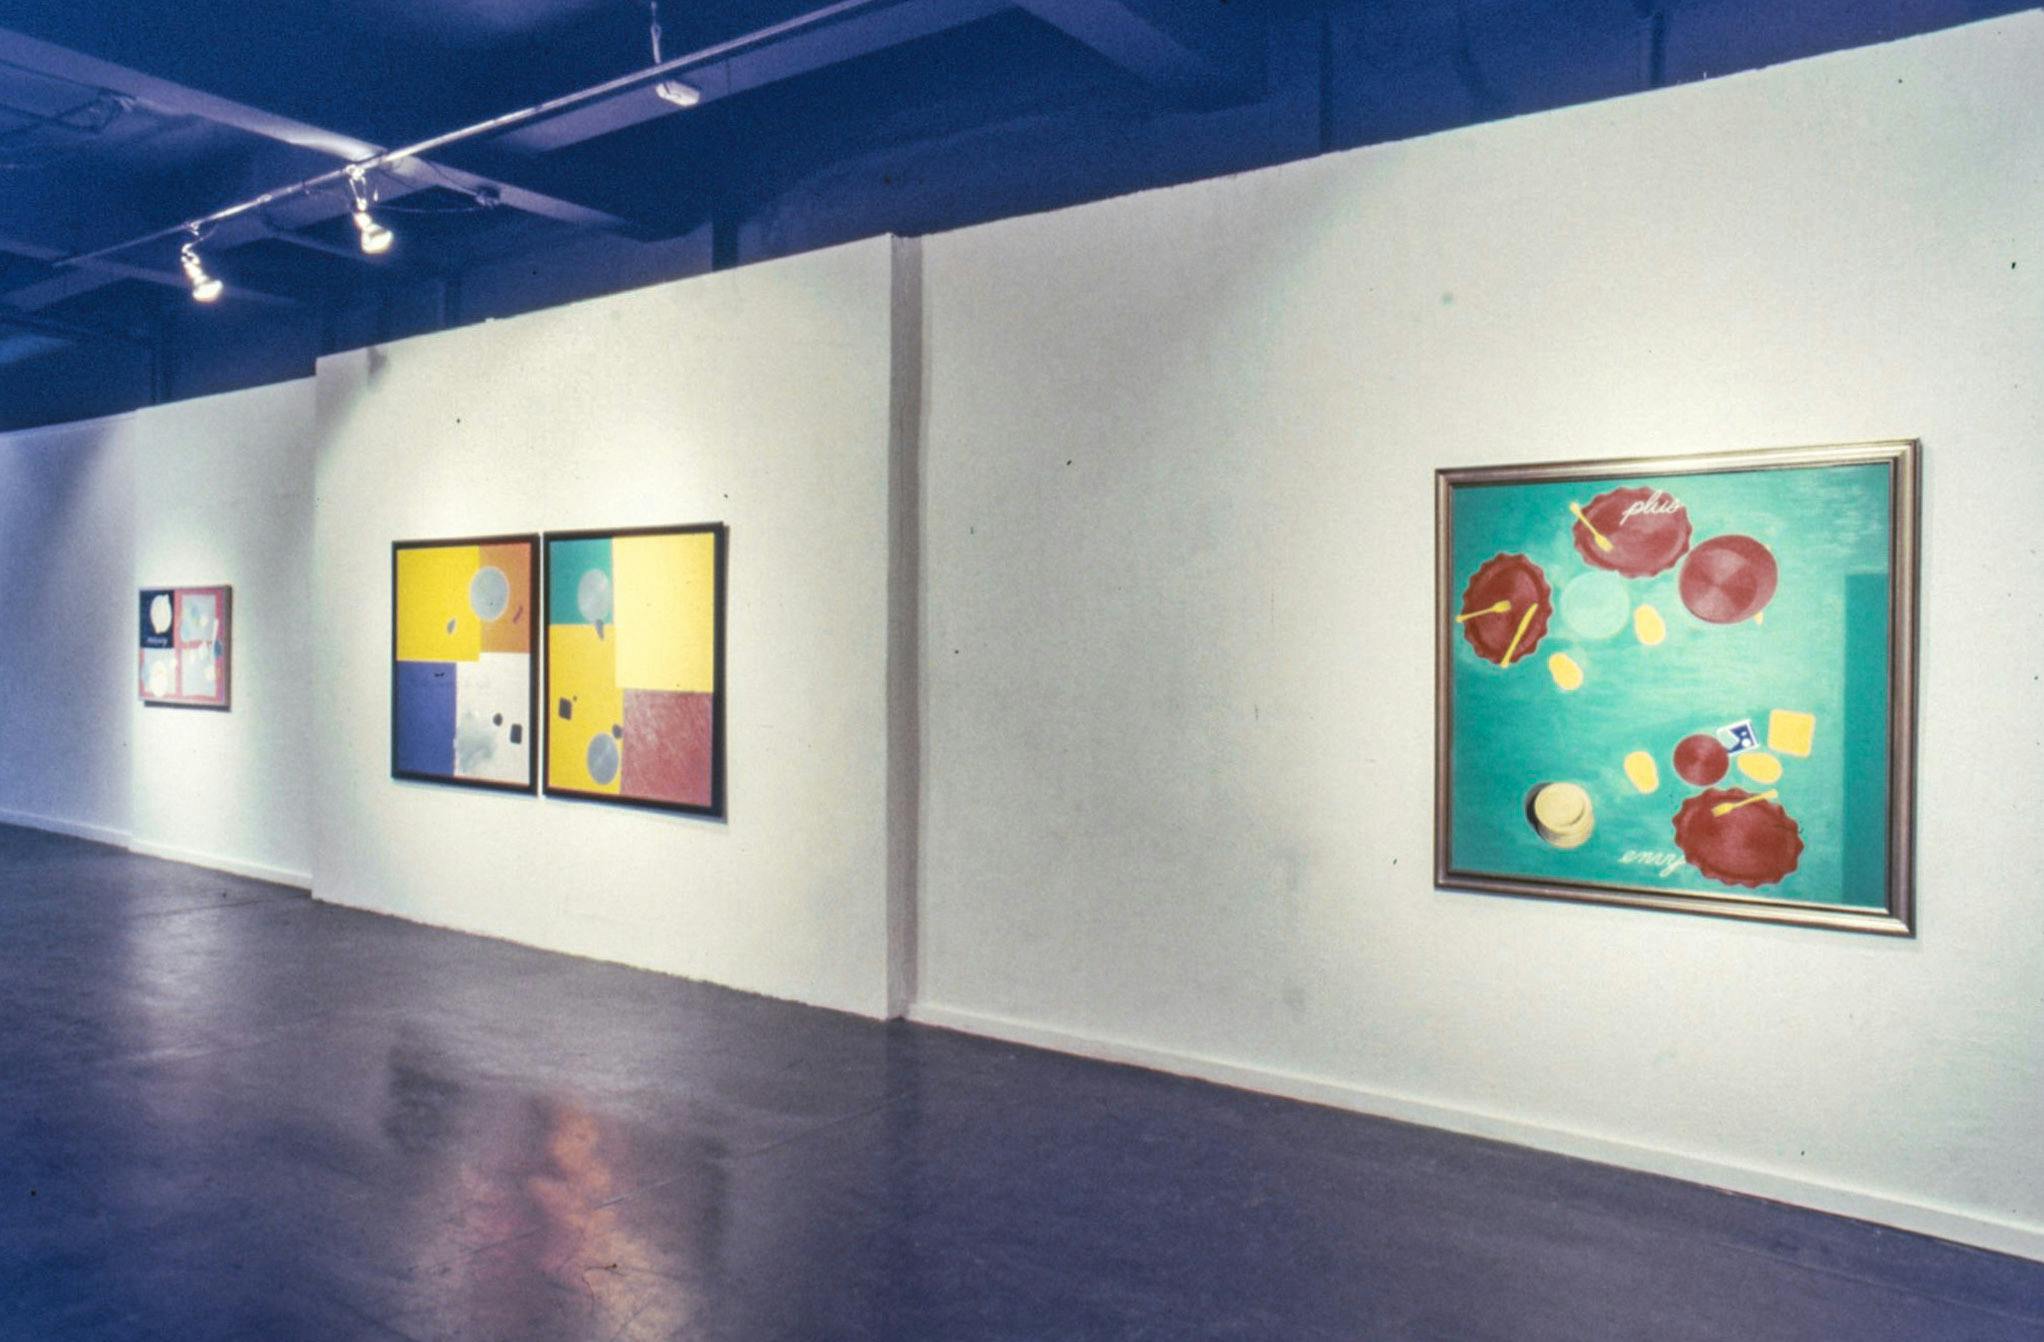 Three paintings on the walls of a gallery. The paintings are in square frames of different sizes and colours. All of the paintings show different sets of dishes from above, on colourful backgrounds.